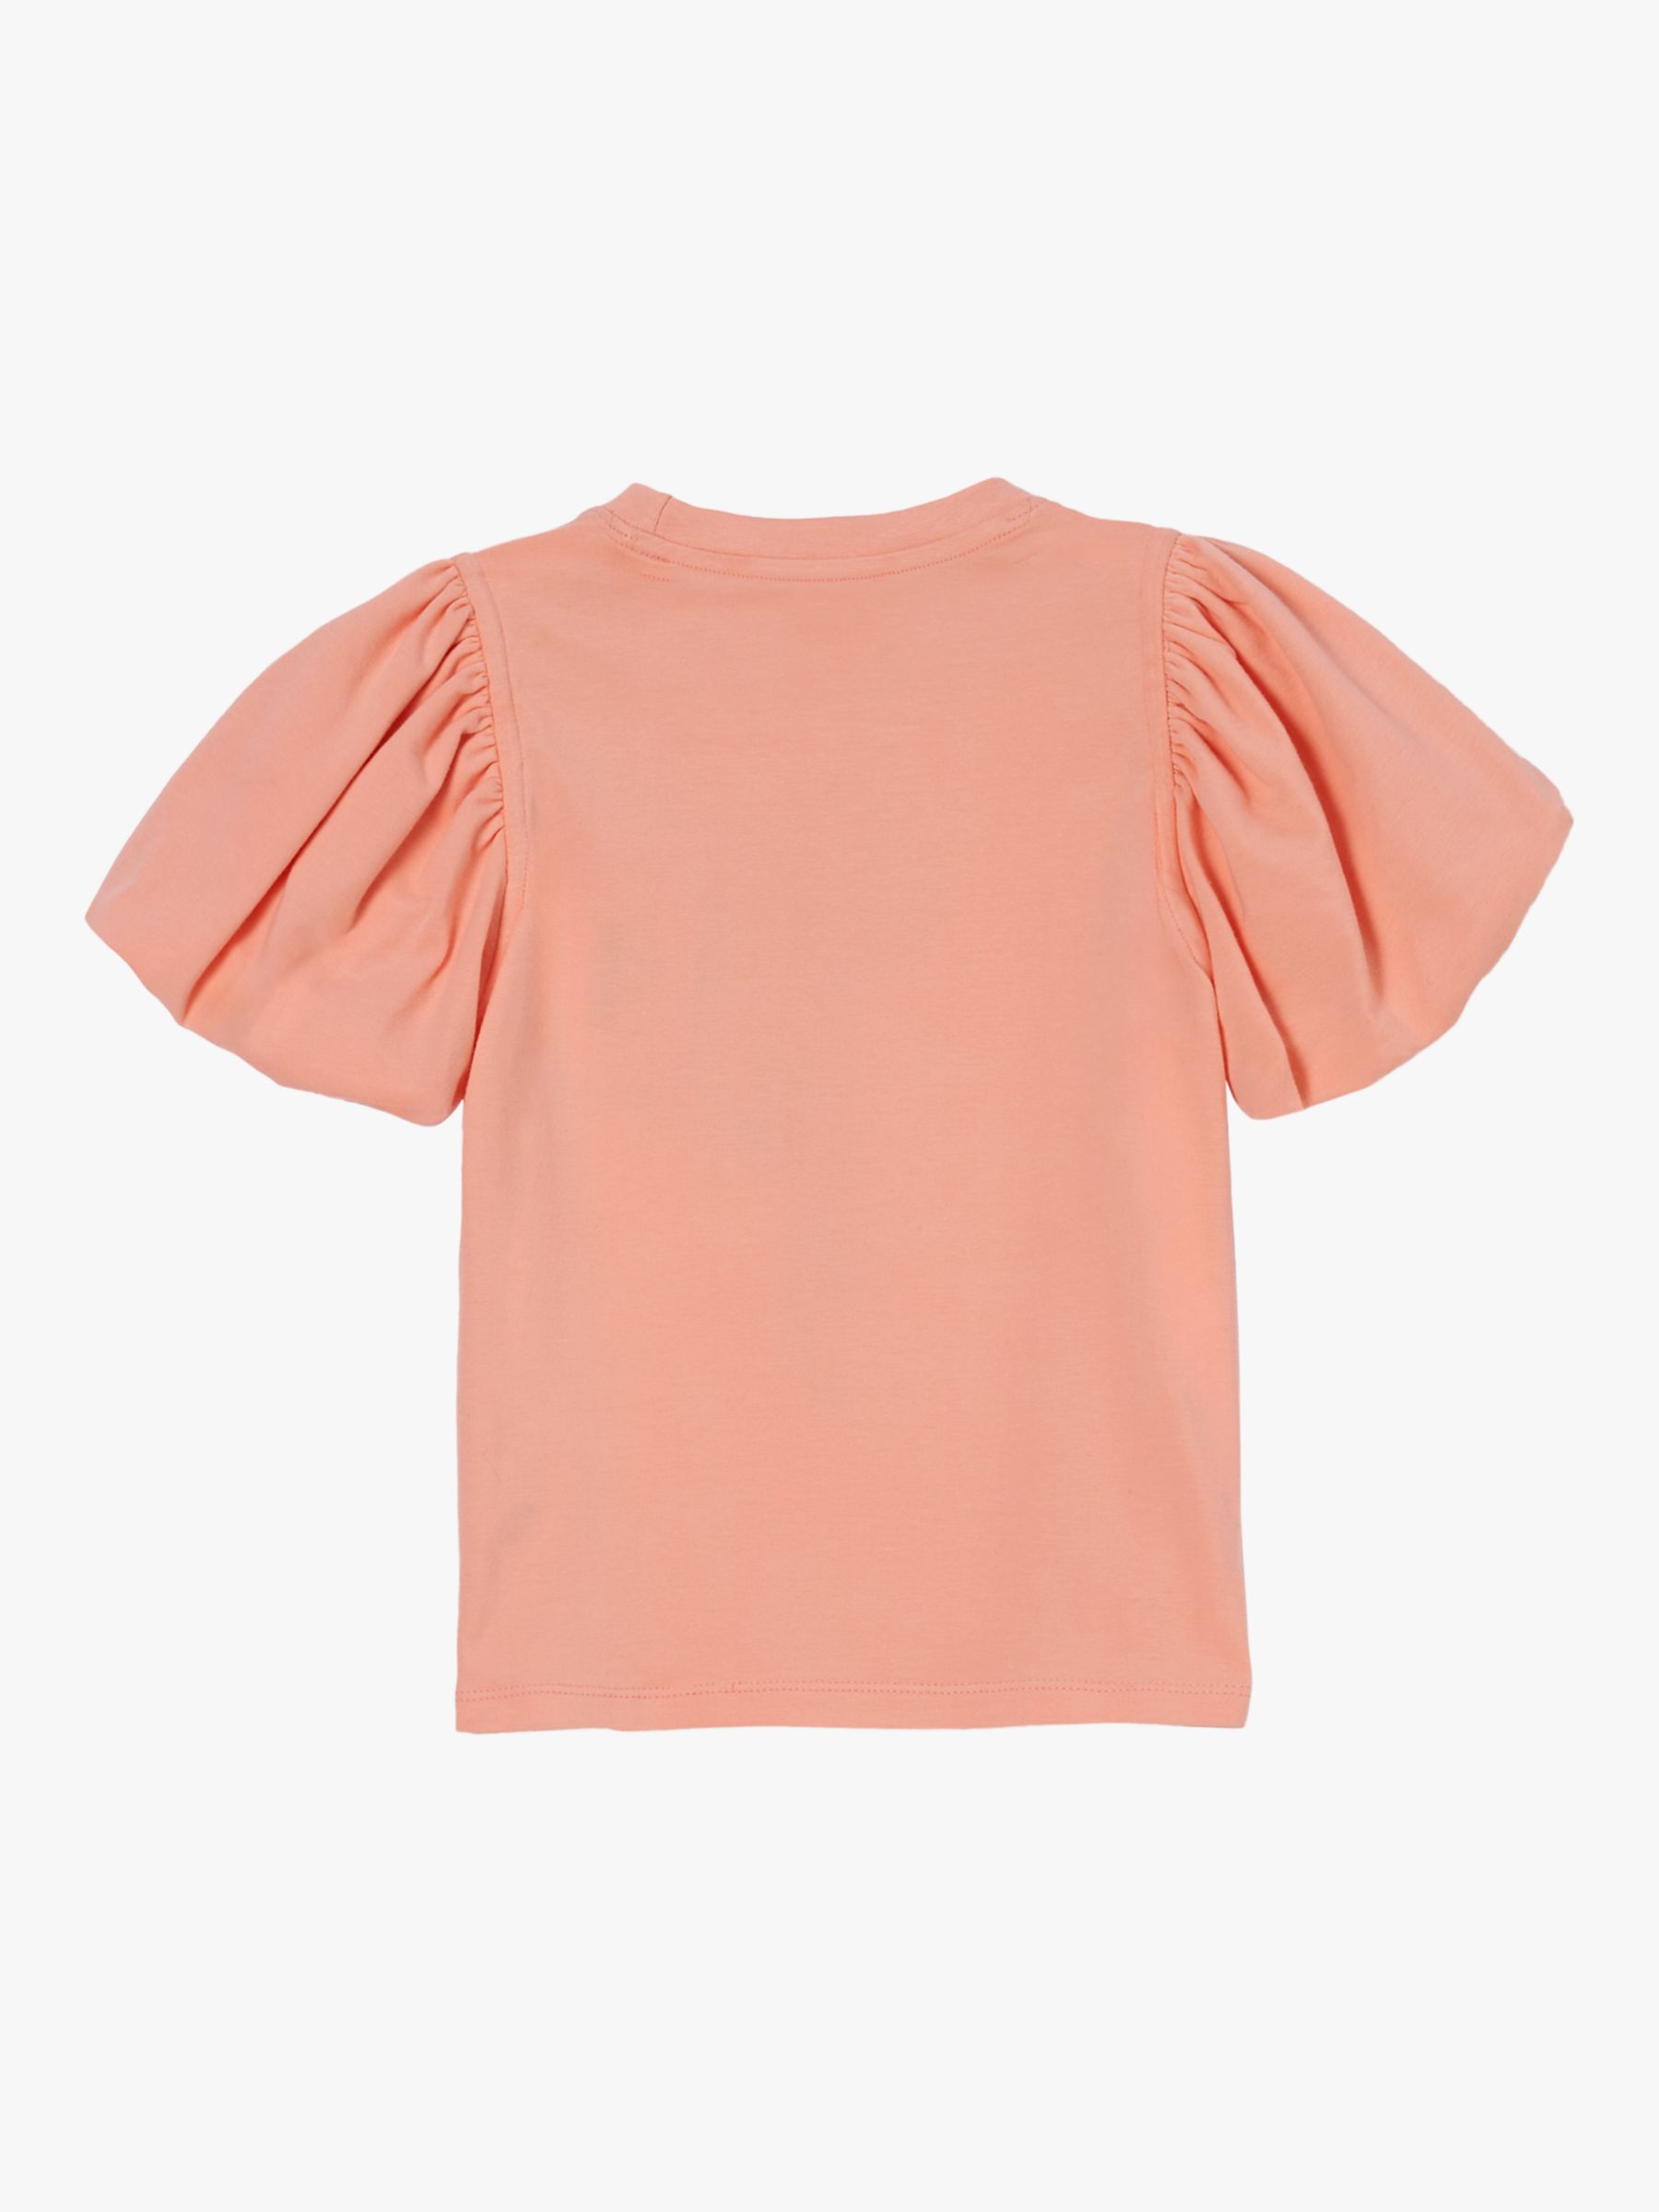 Angel & Rocket Kids' Embroidered Puff Sleeve Top, Apricot, 9-10 years